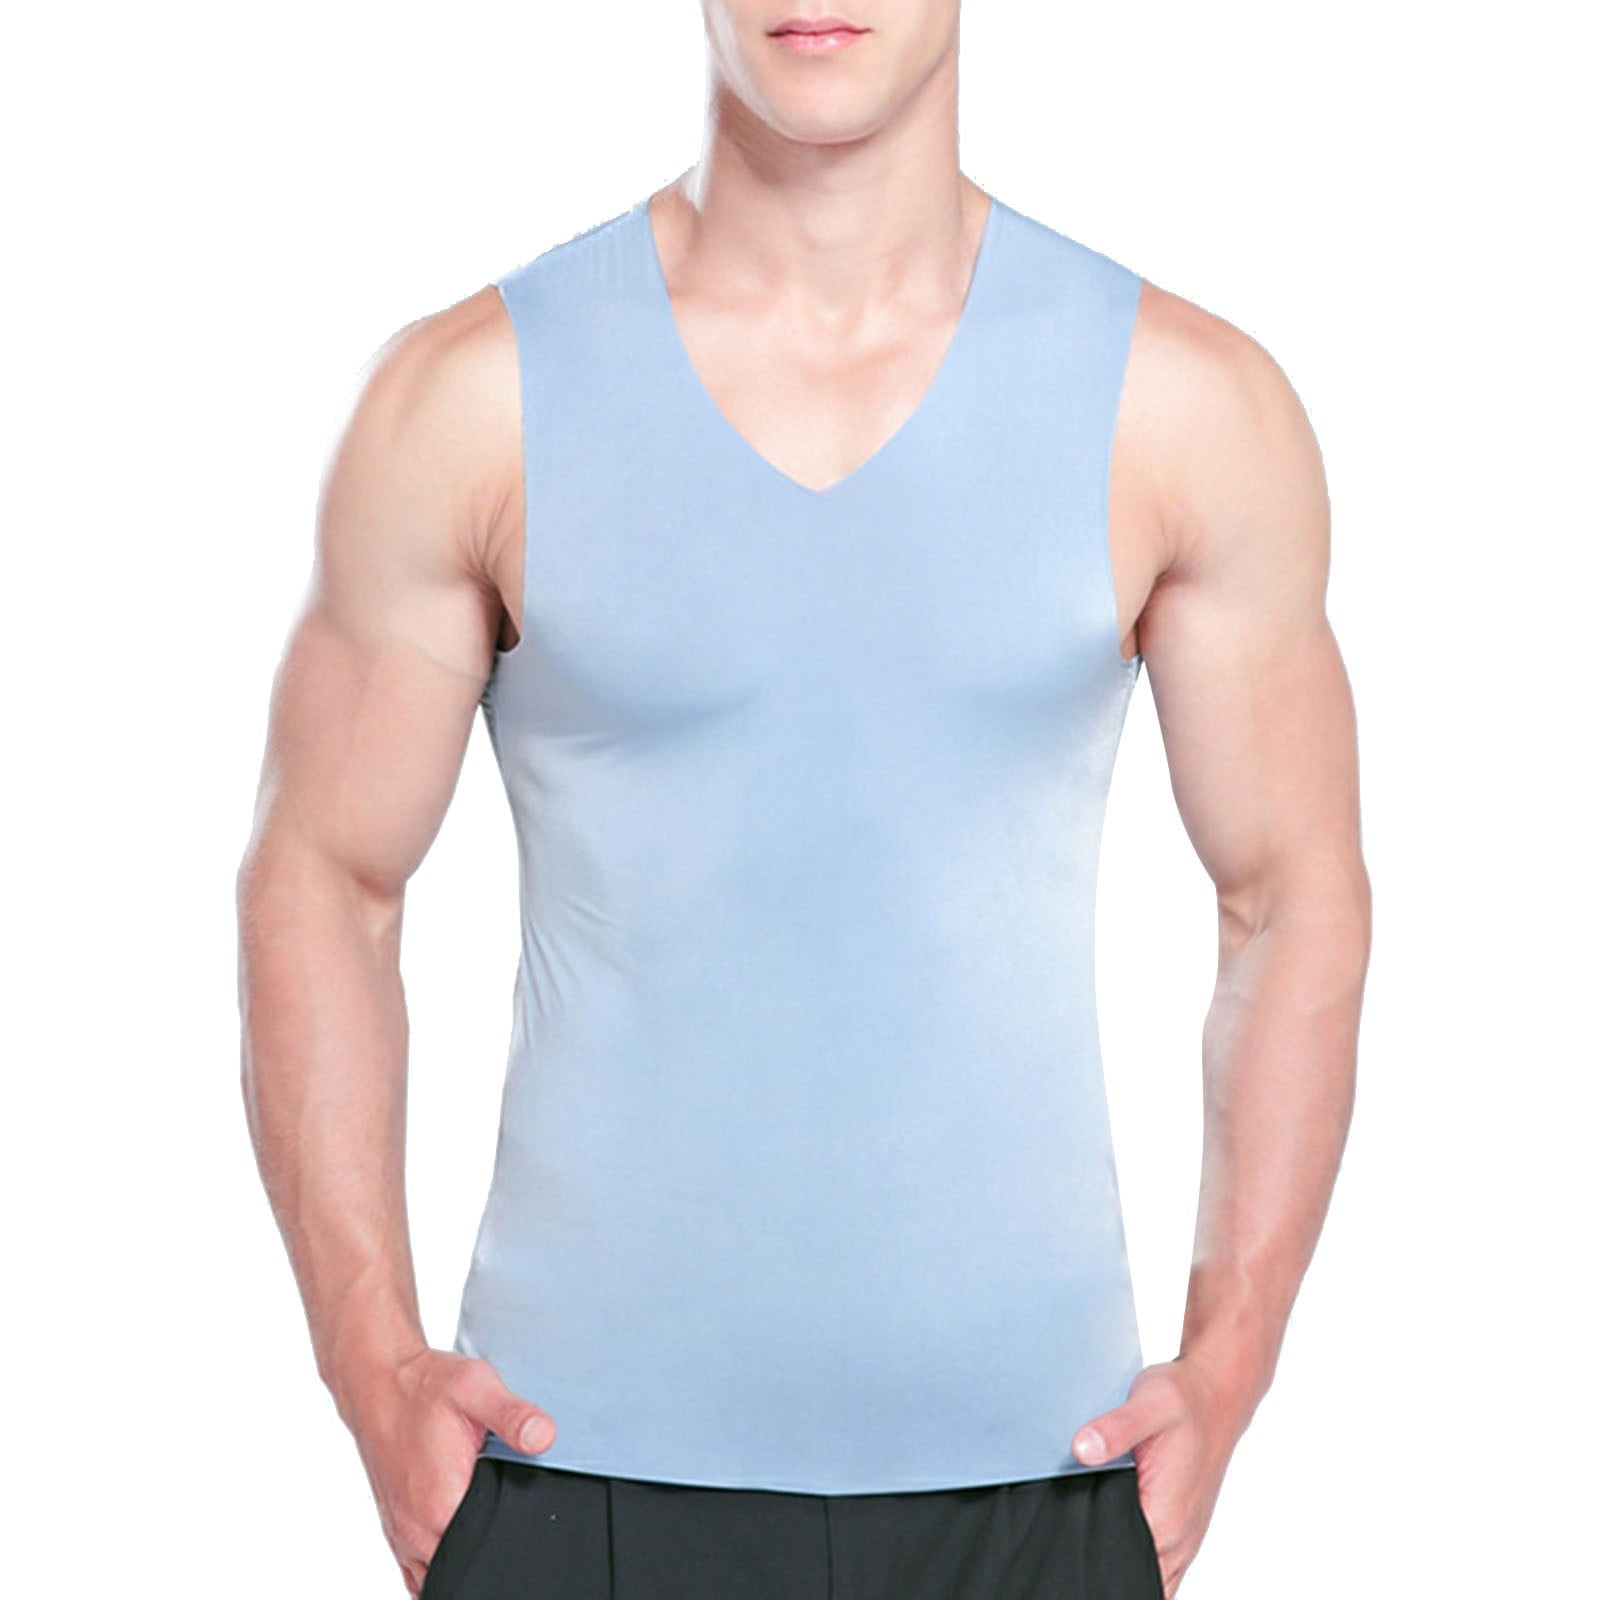 kpoplk Men's Tank Tops Workout Sleeveless Gym Muscle Shirts Athletic ...